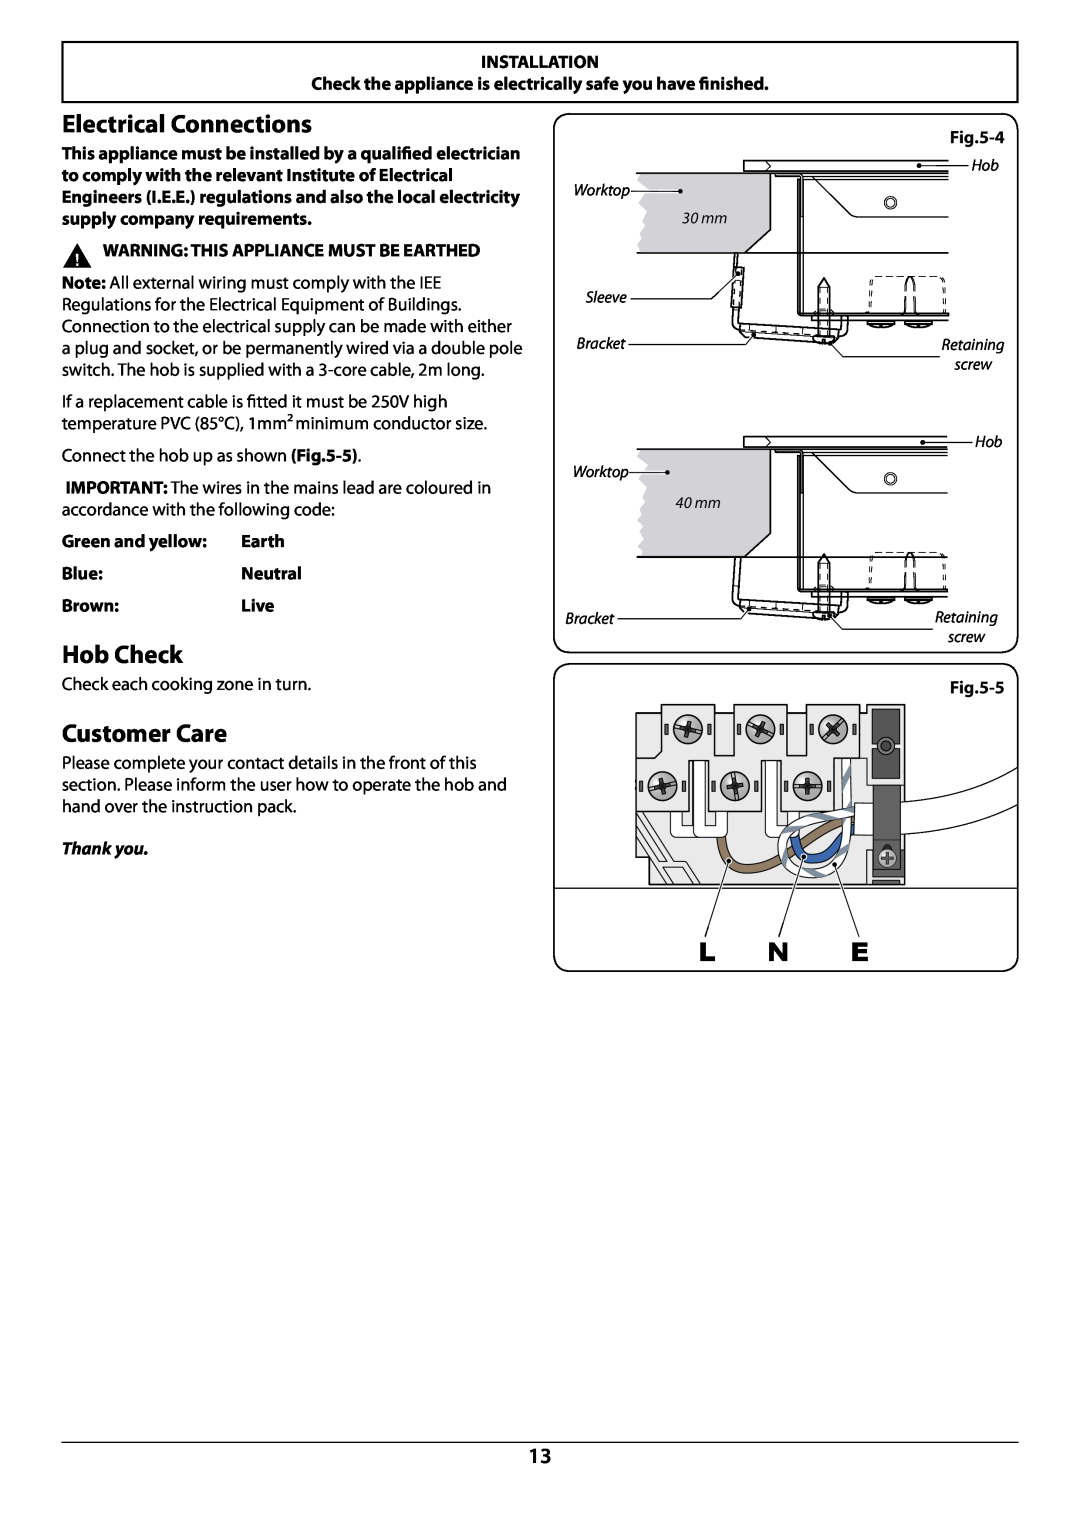 Rangemaster RC77 manual Electrical Connections, Hob Check, Customer Care, L N E, Thank you 